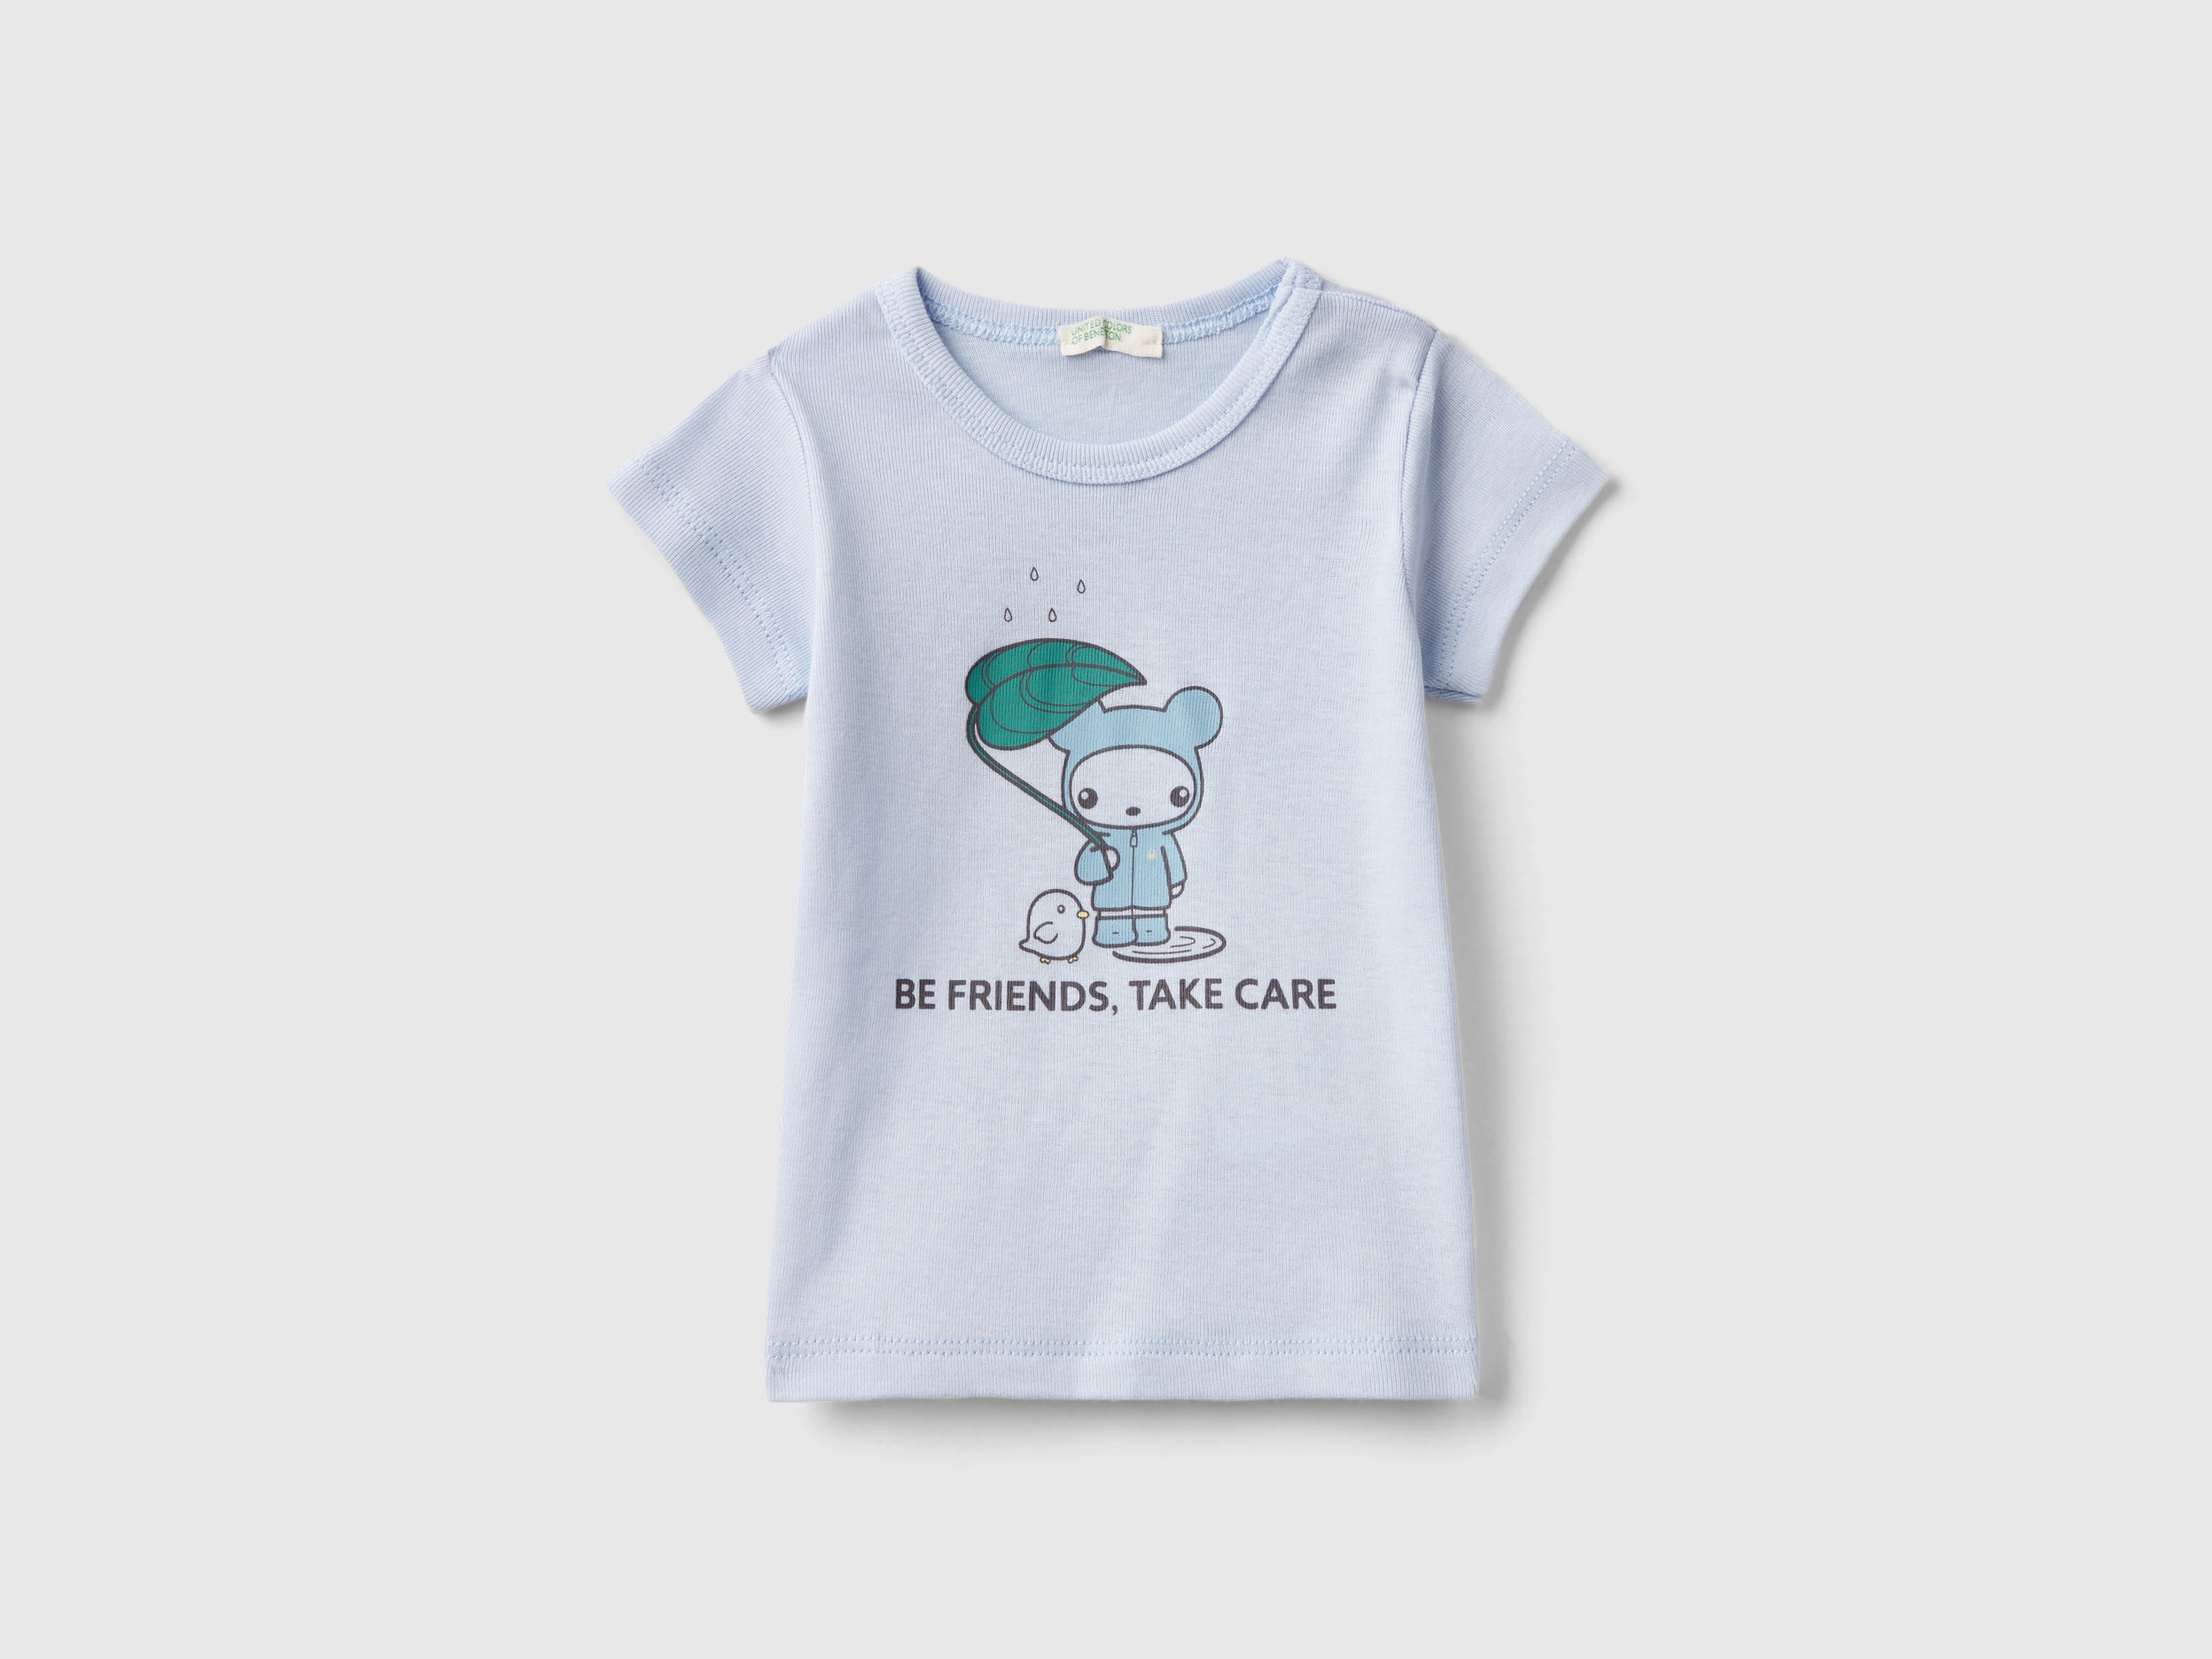 Image of Benetton, T-shirt In 100% Organic Cotton, size 50, Sky Blue, Kids